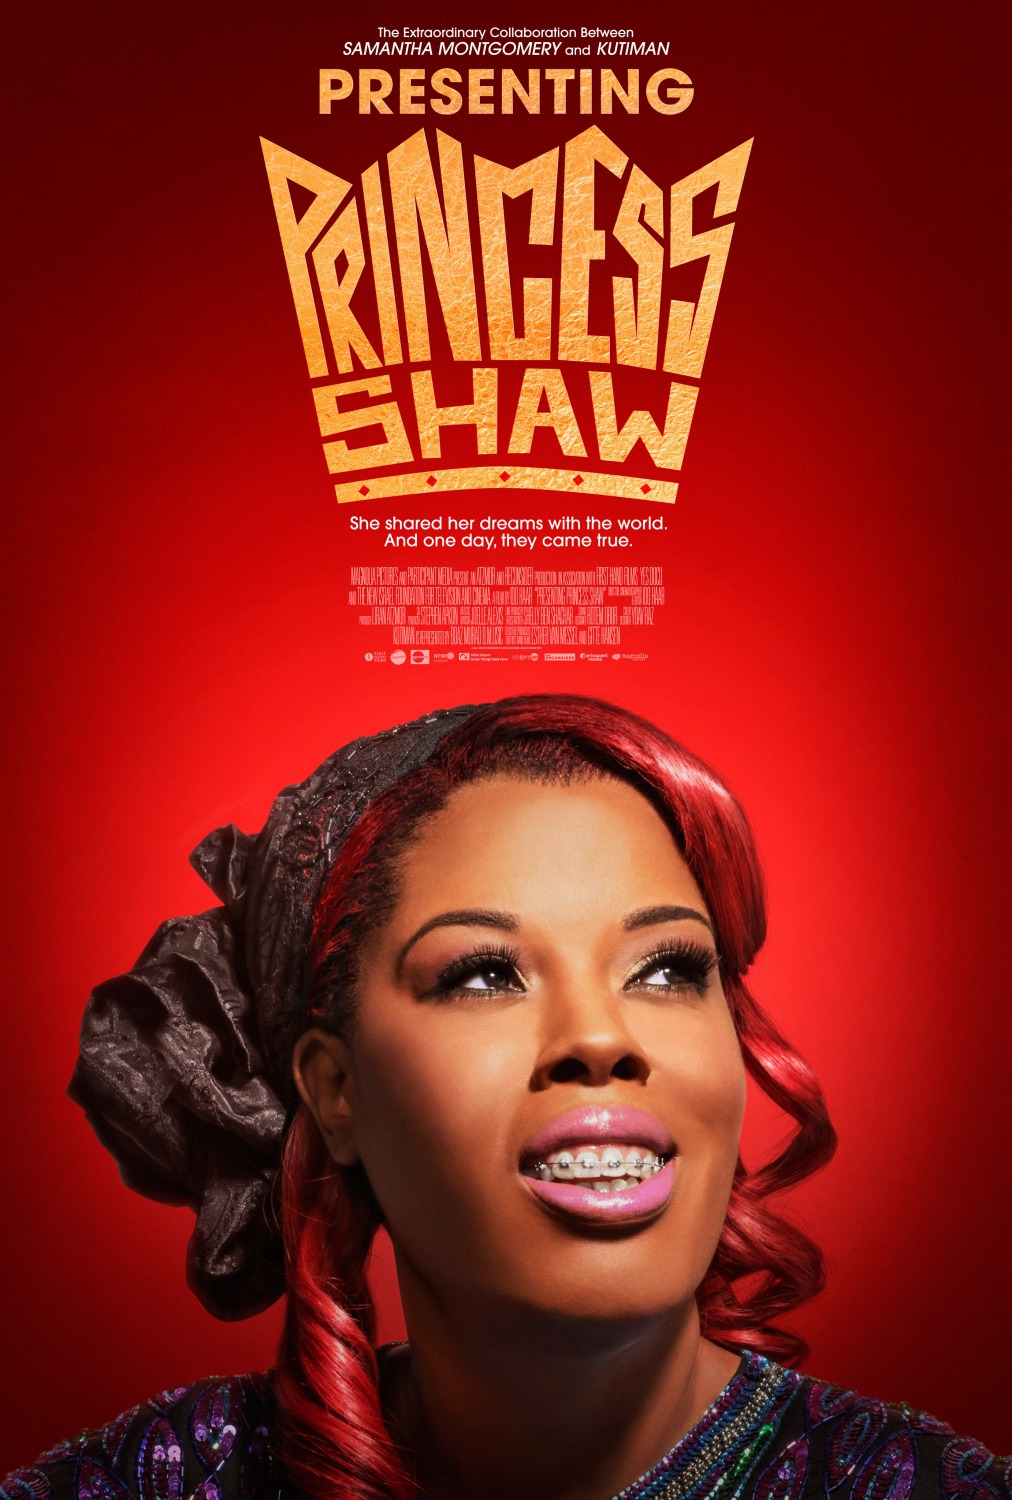 Extra Large Movie Poster Image for Presenting Princess Shaw 